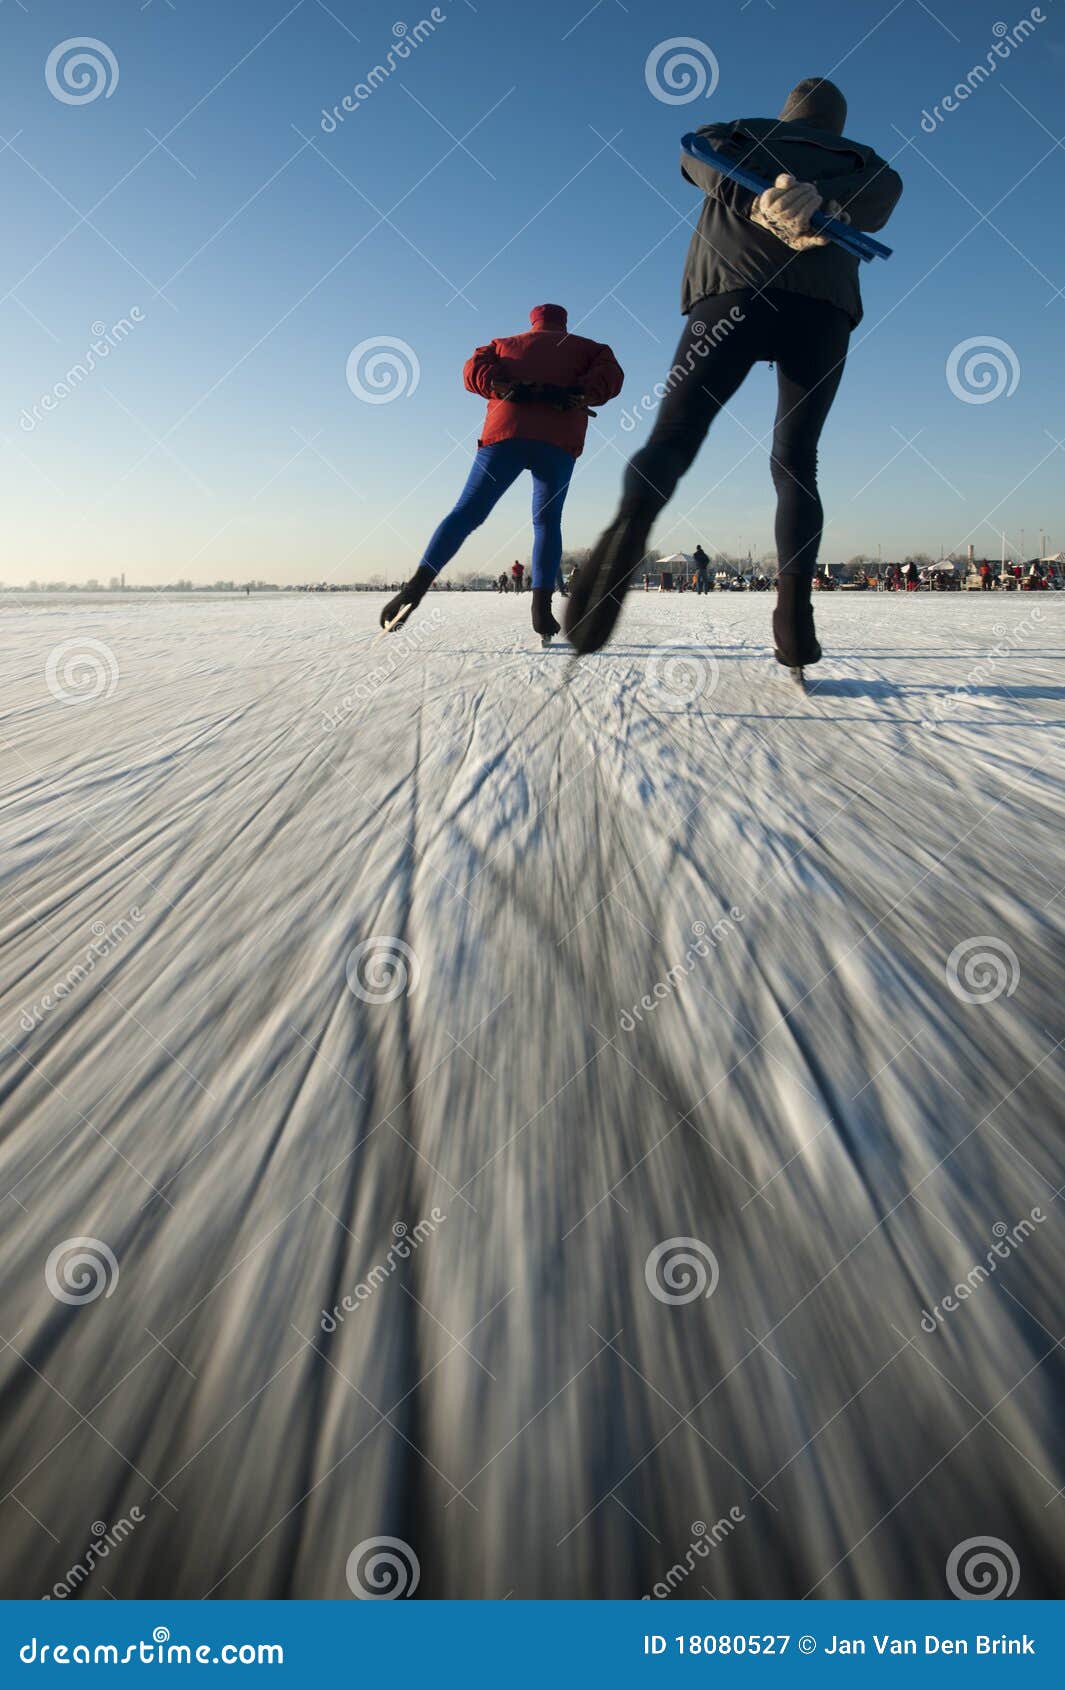 ice skaters on a frozen lake.